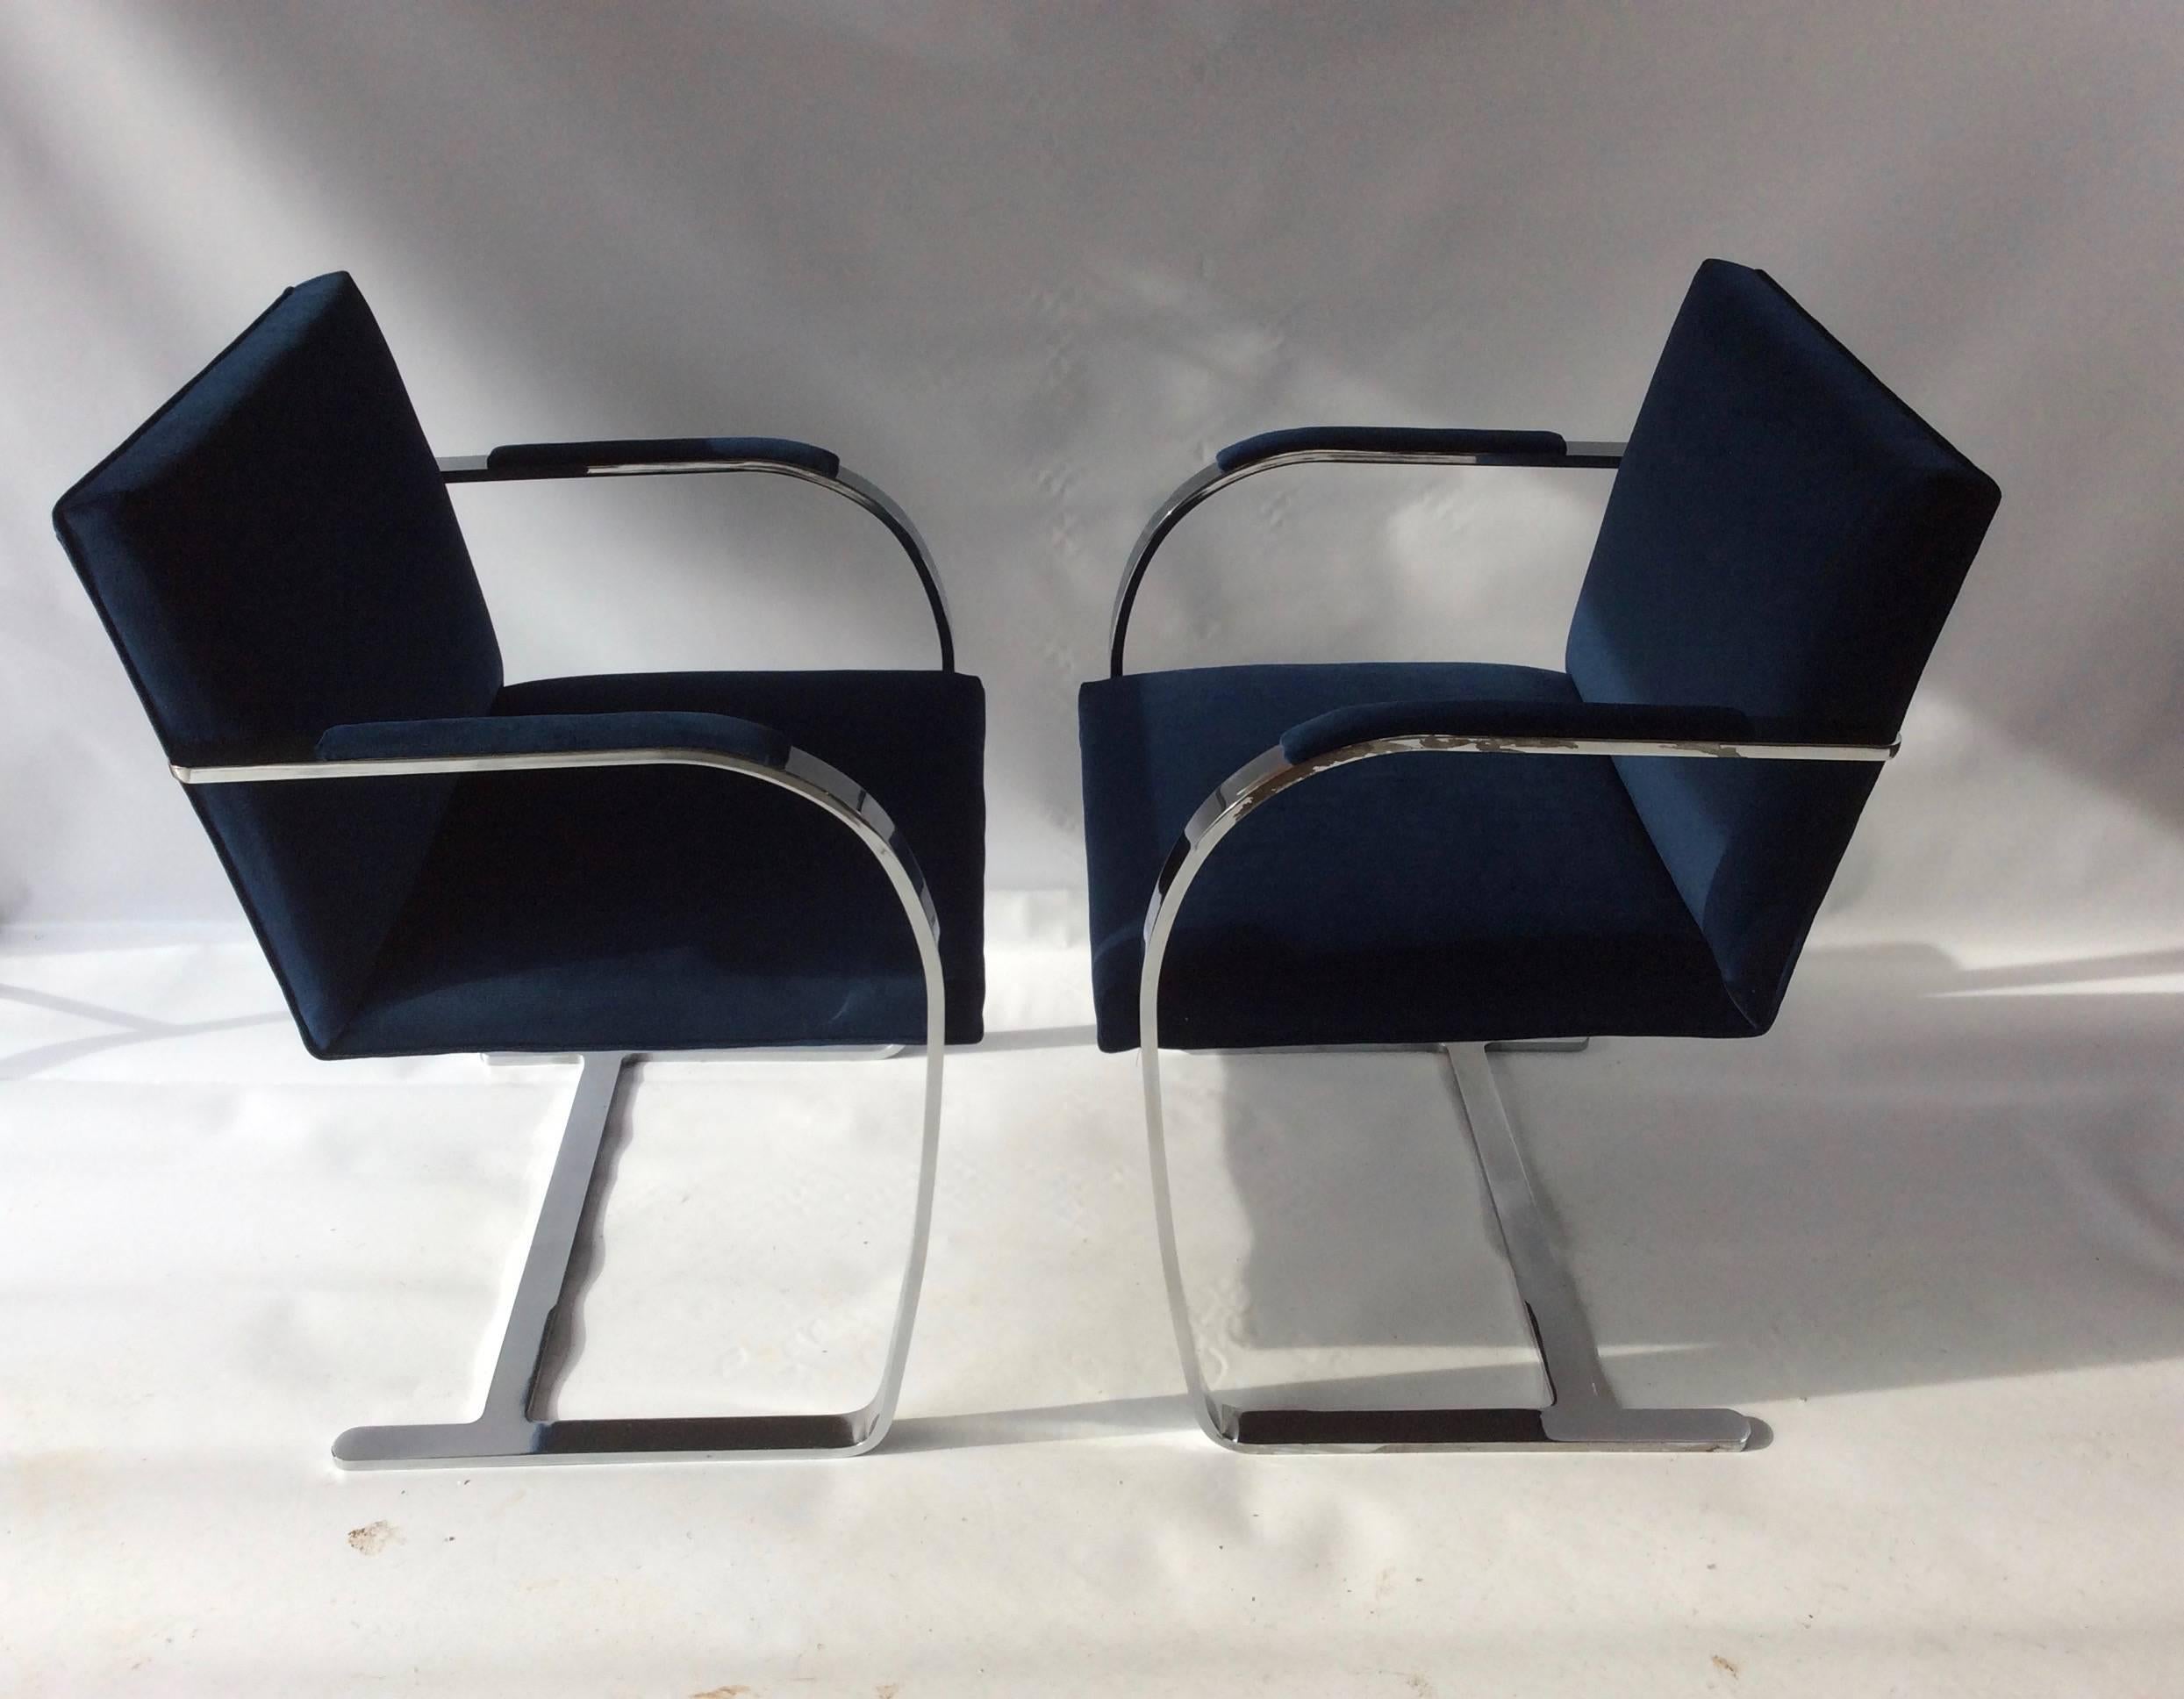 20th Century Mies Van Der Rohe, BRNO Flat Bar Chrome Cantilevered Chairs, New Upholstery